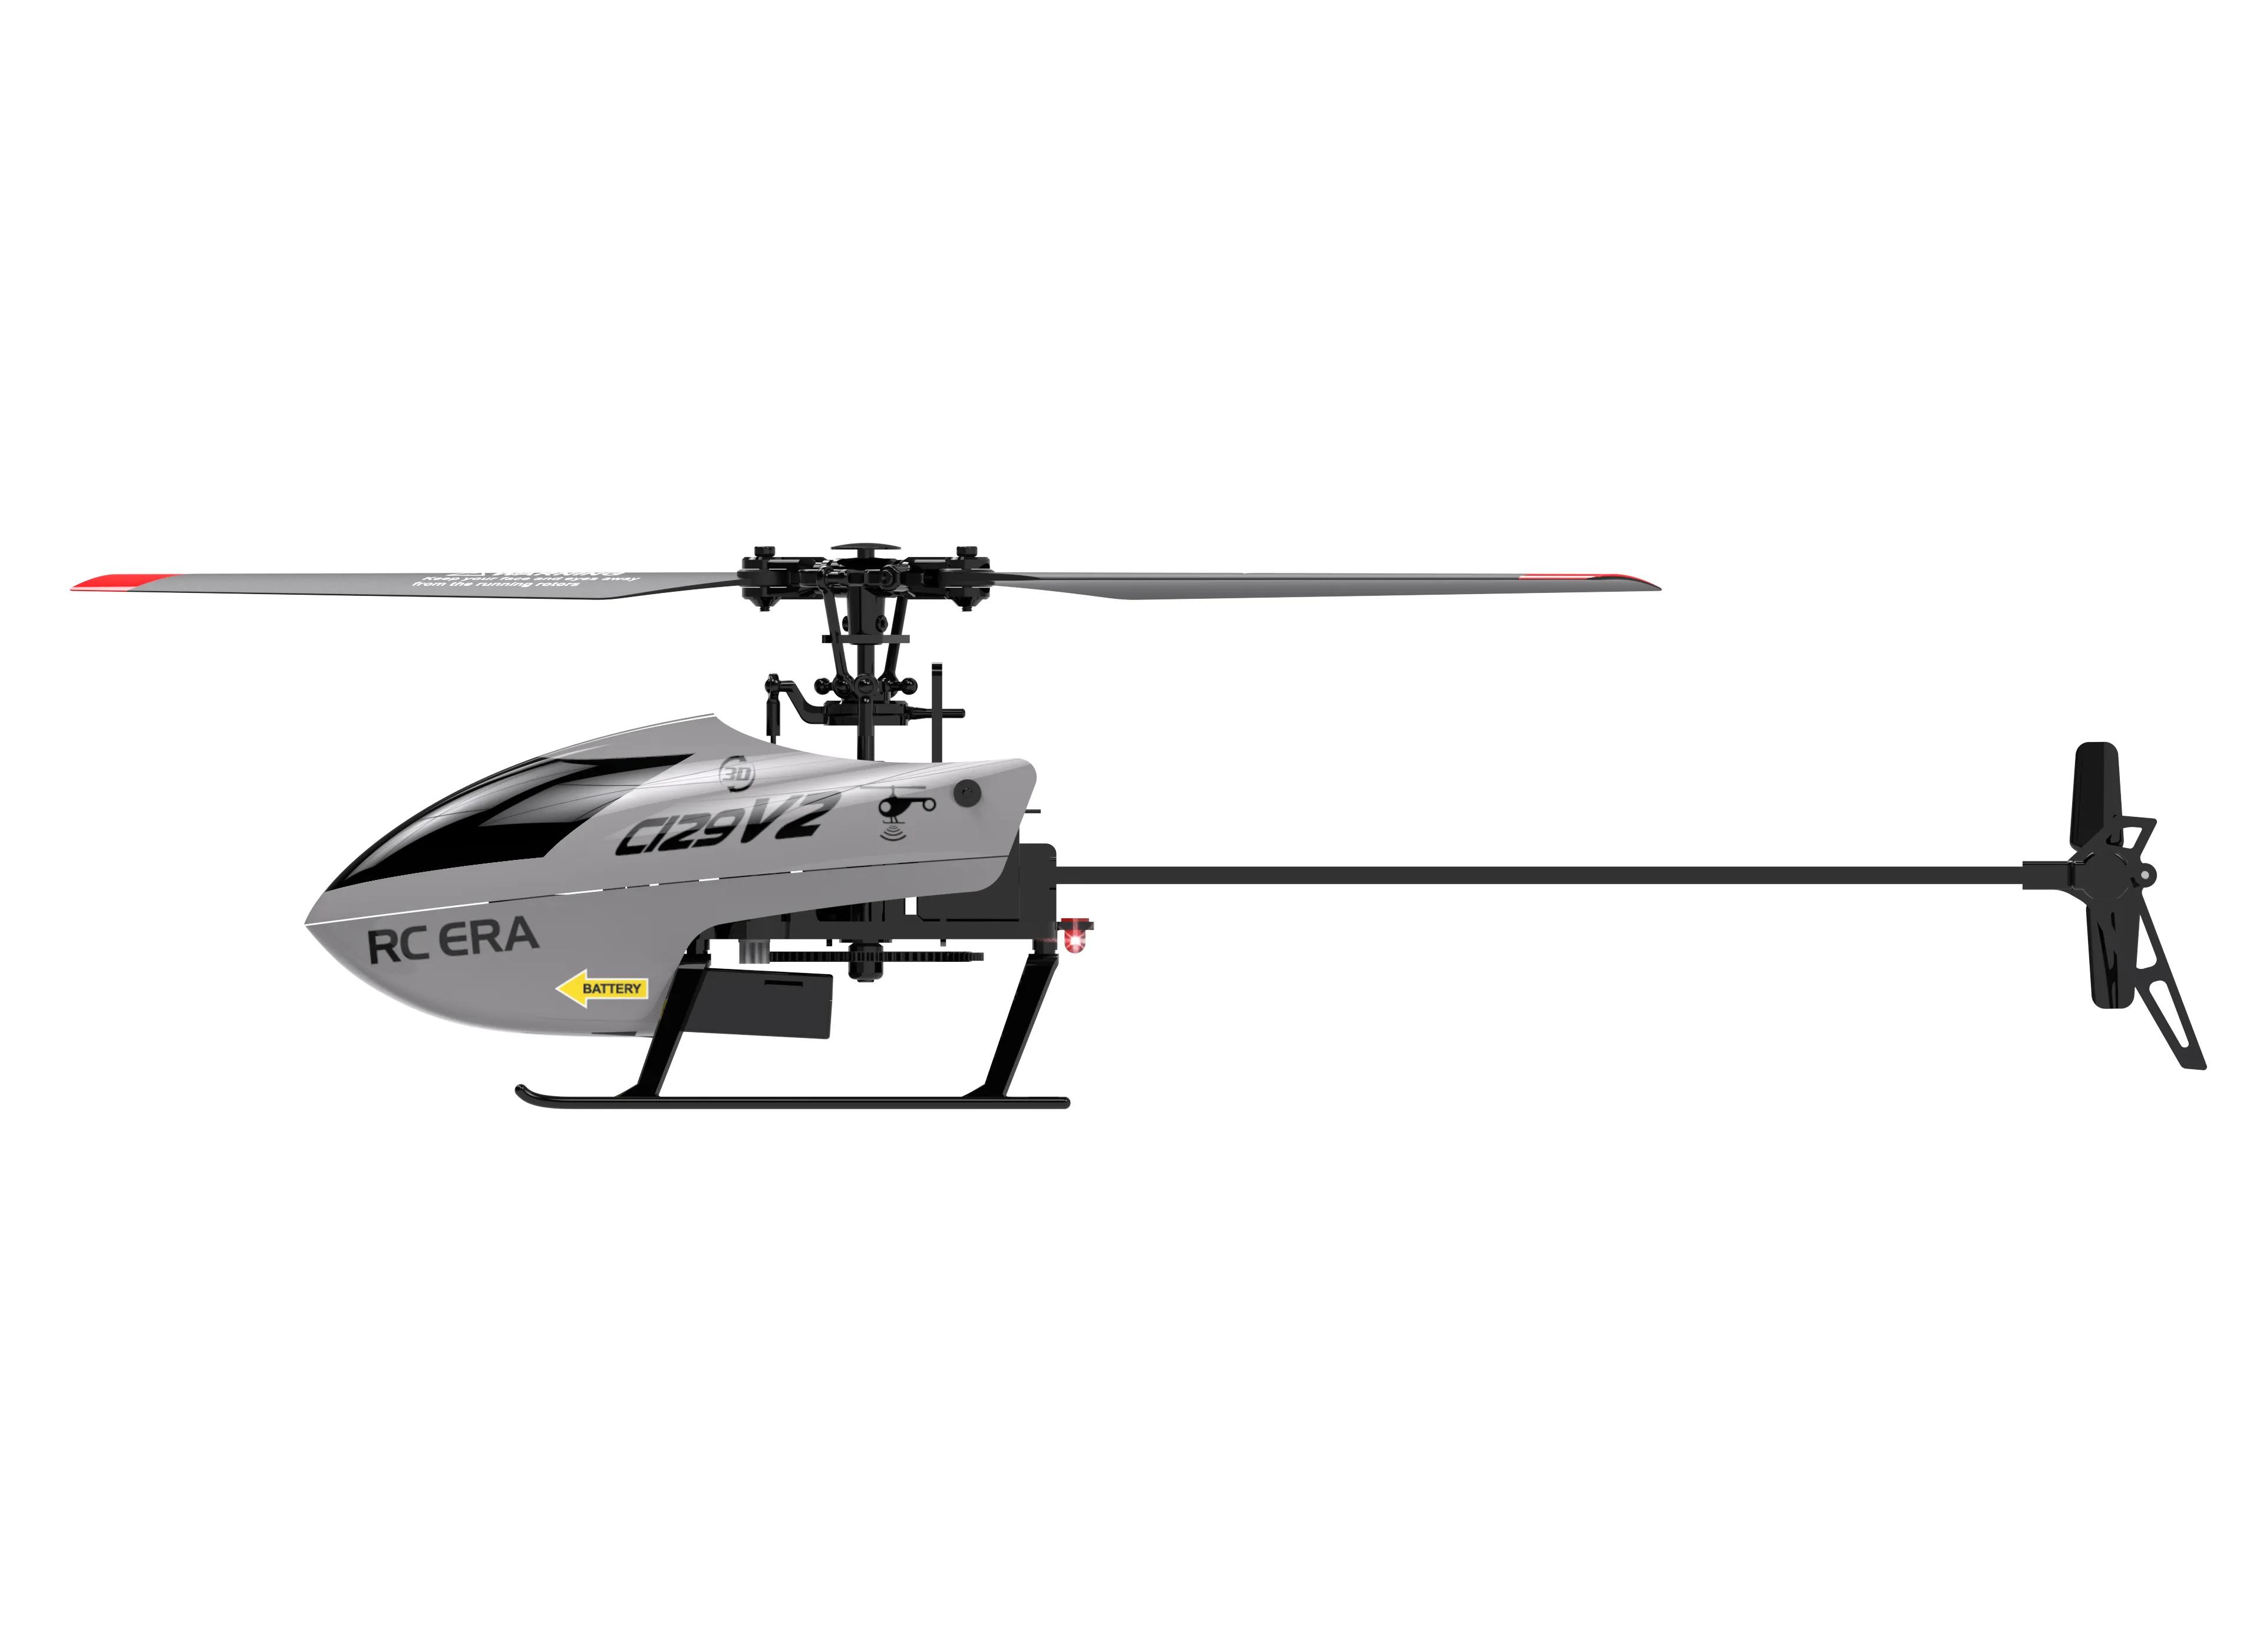 Ch 46 Remote Control Helicopter: Battery Life and Maintenance